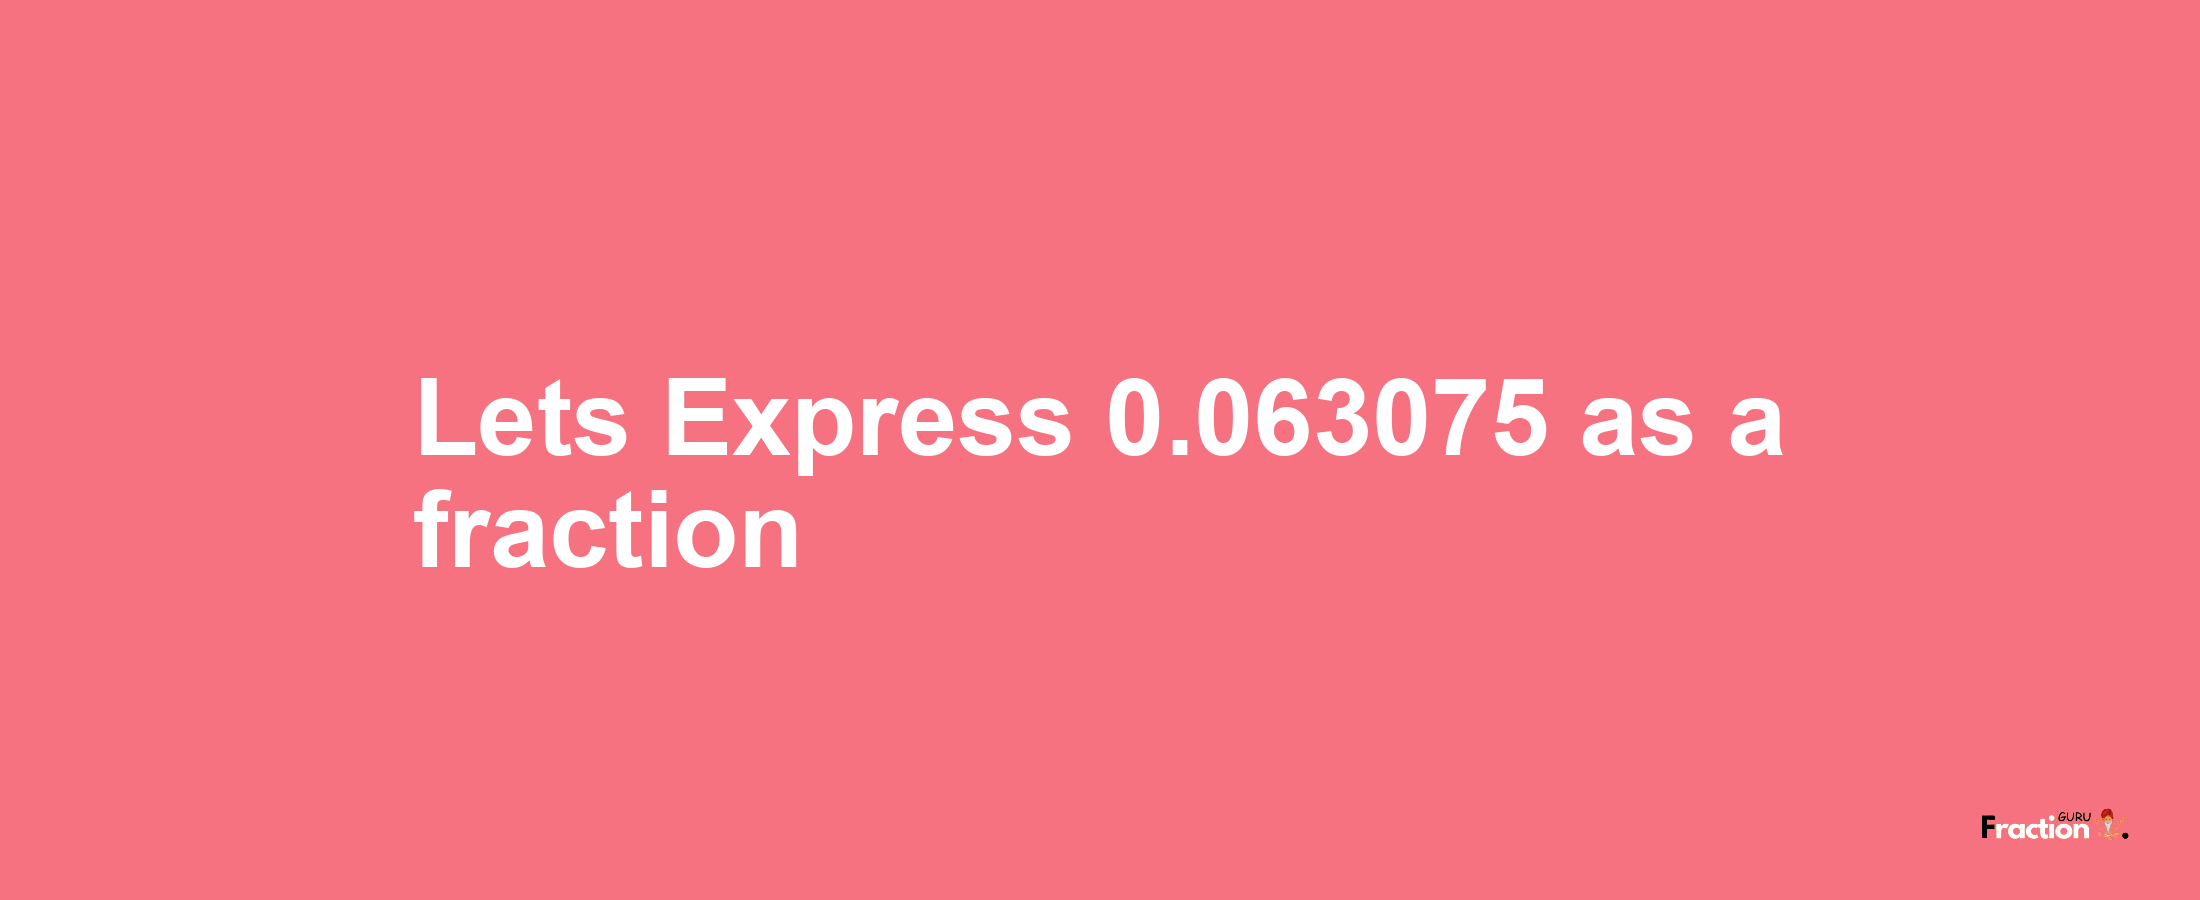 Lets Express 0.063075 as afraction